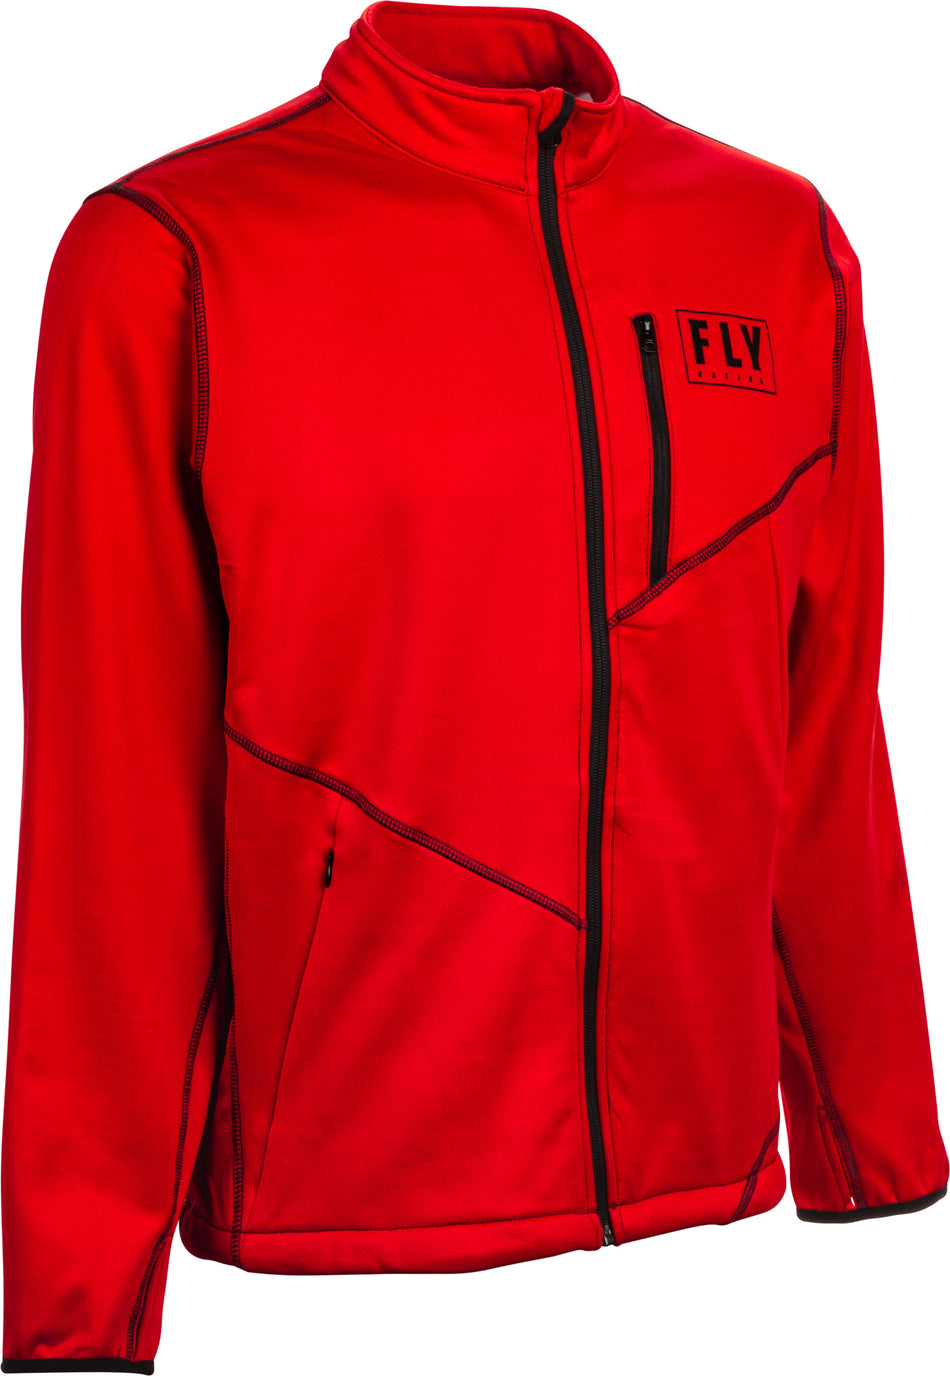 FLY RACING Mid-Layer Jacket Red Sm 354-6321S